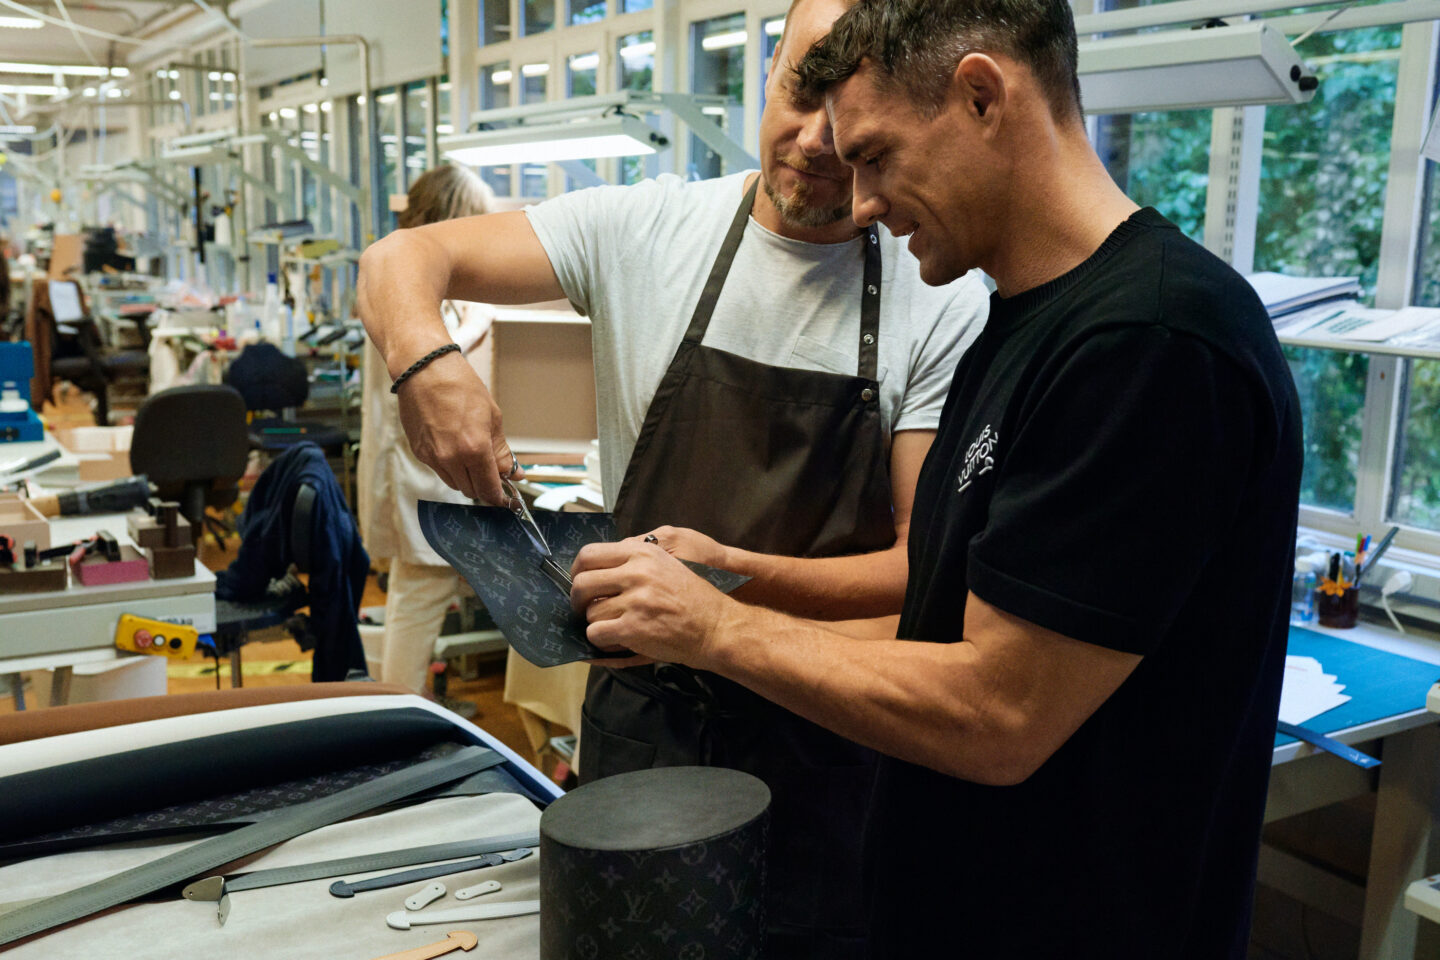 Louis Vuitton teams up with rugby legend Dan Carter for first